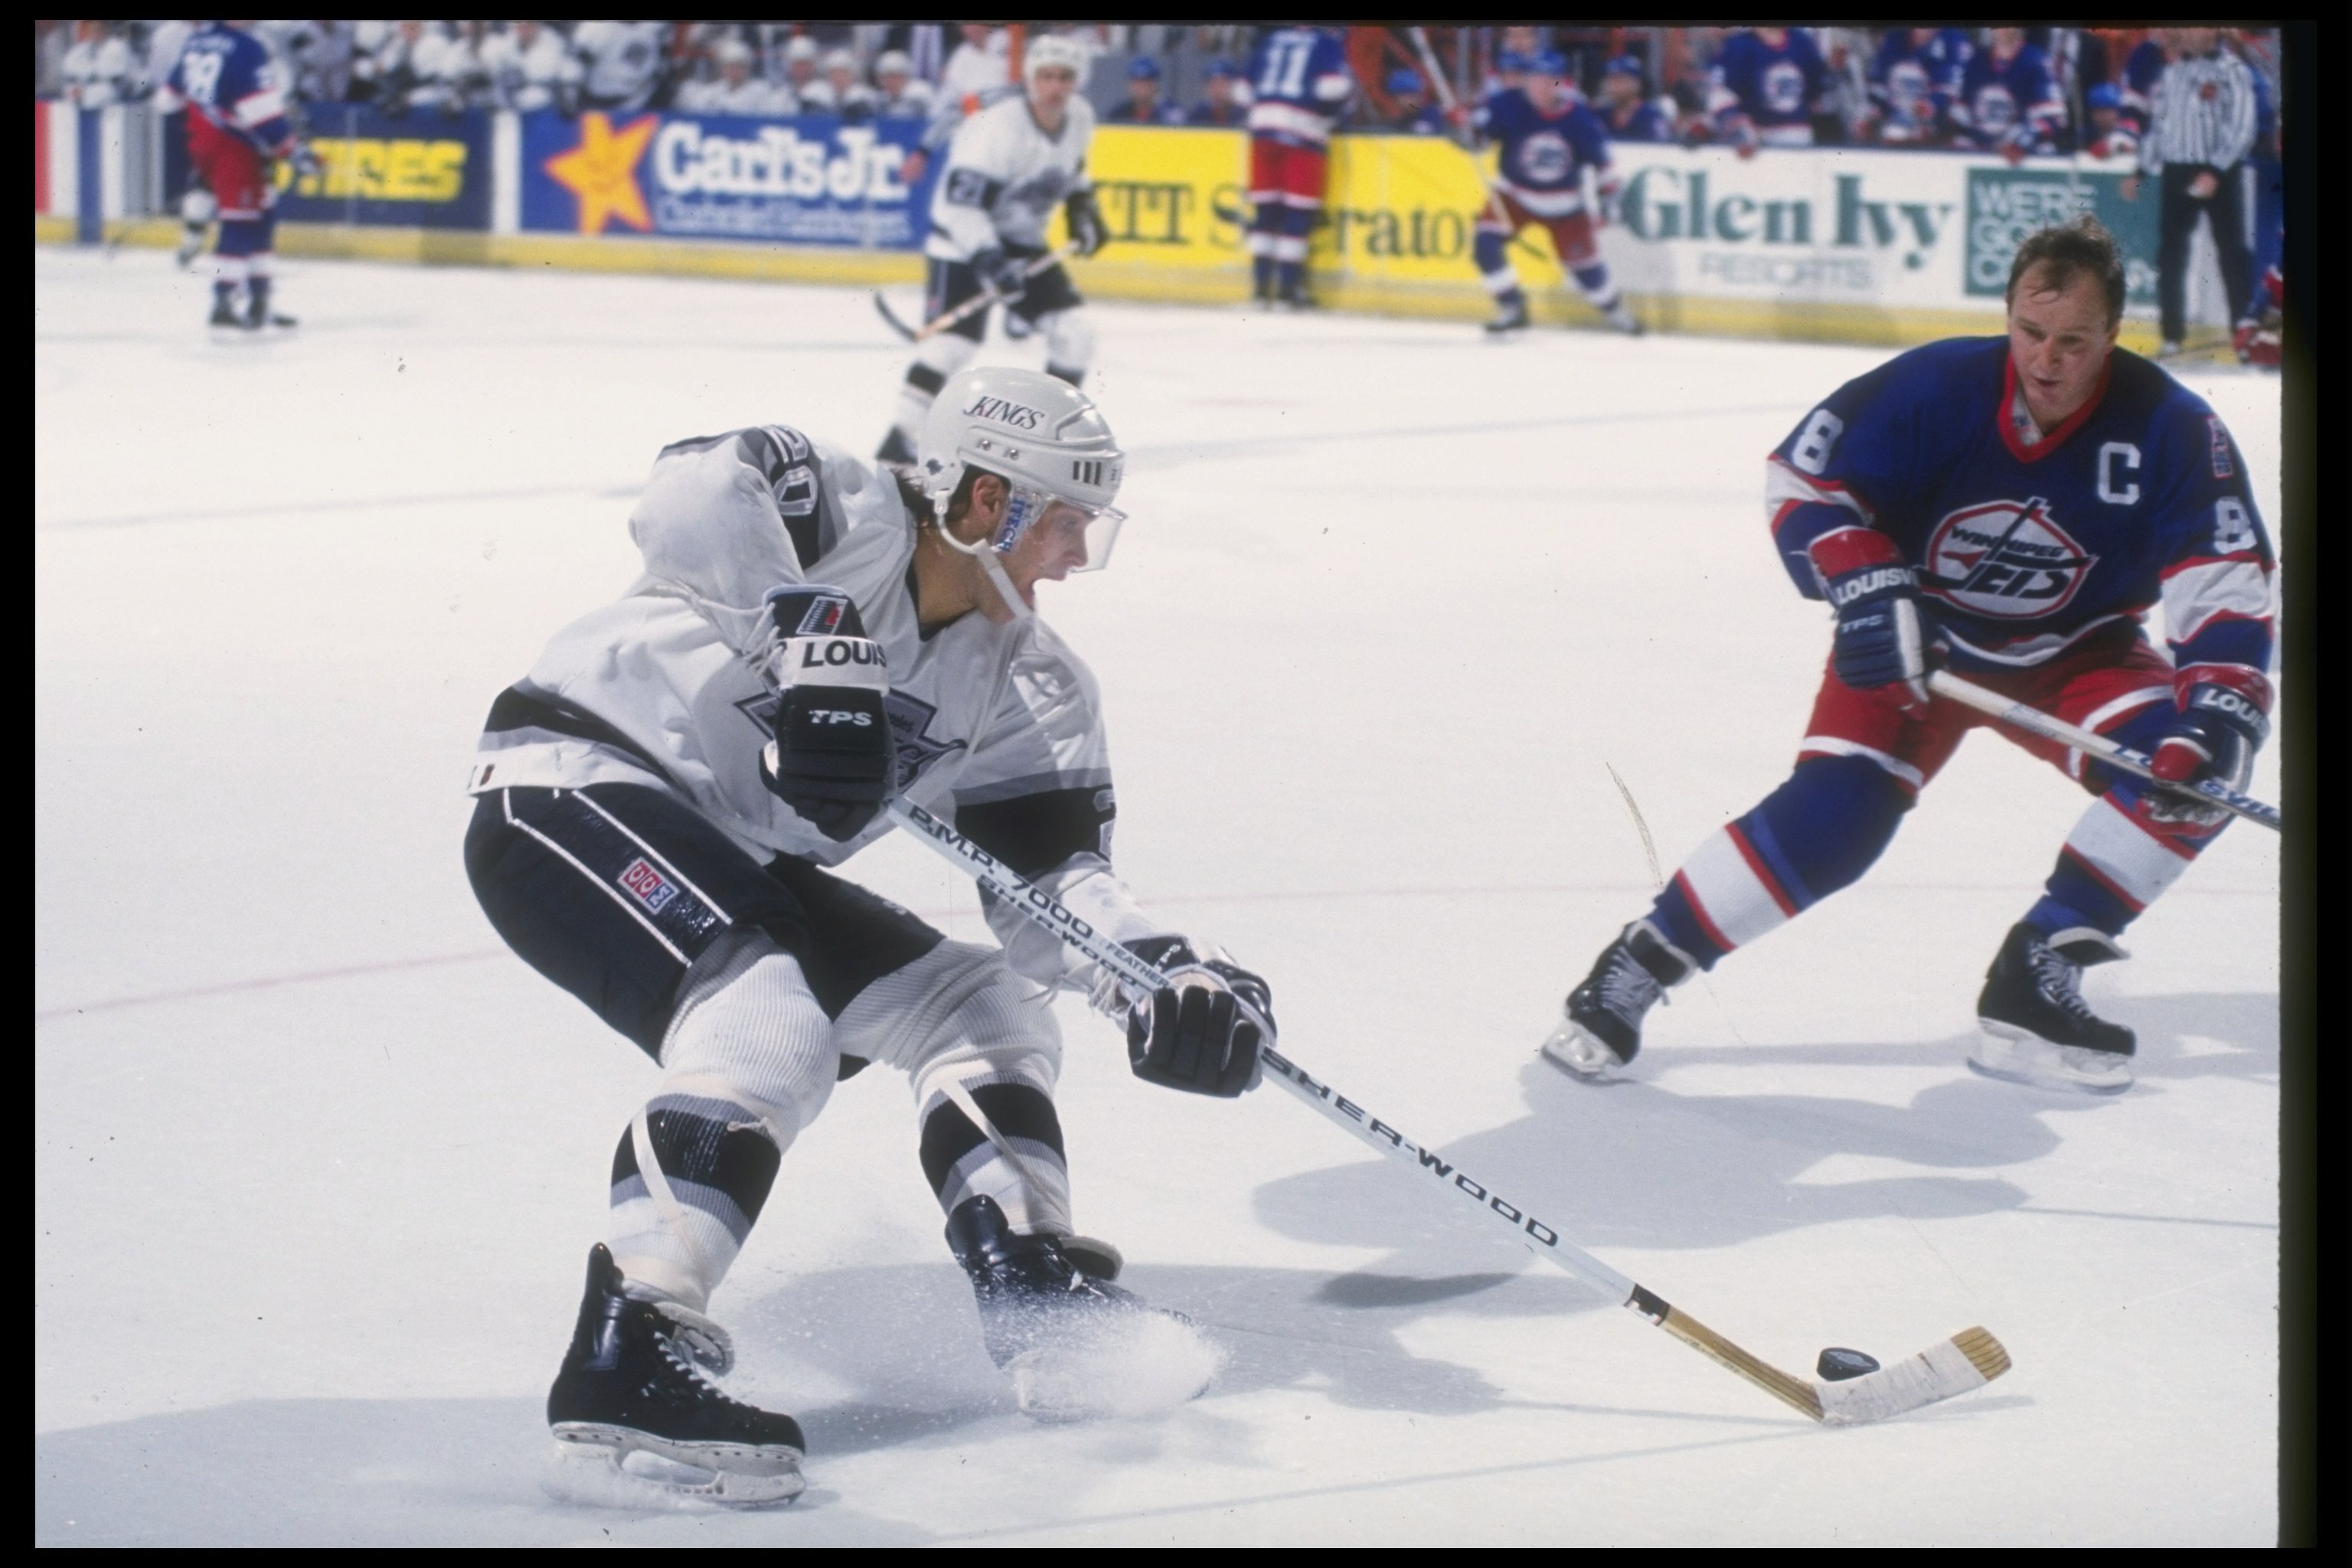 Frozen Royalty Video: LA Kings Luc Robitaille Talks About His New